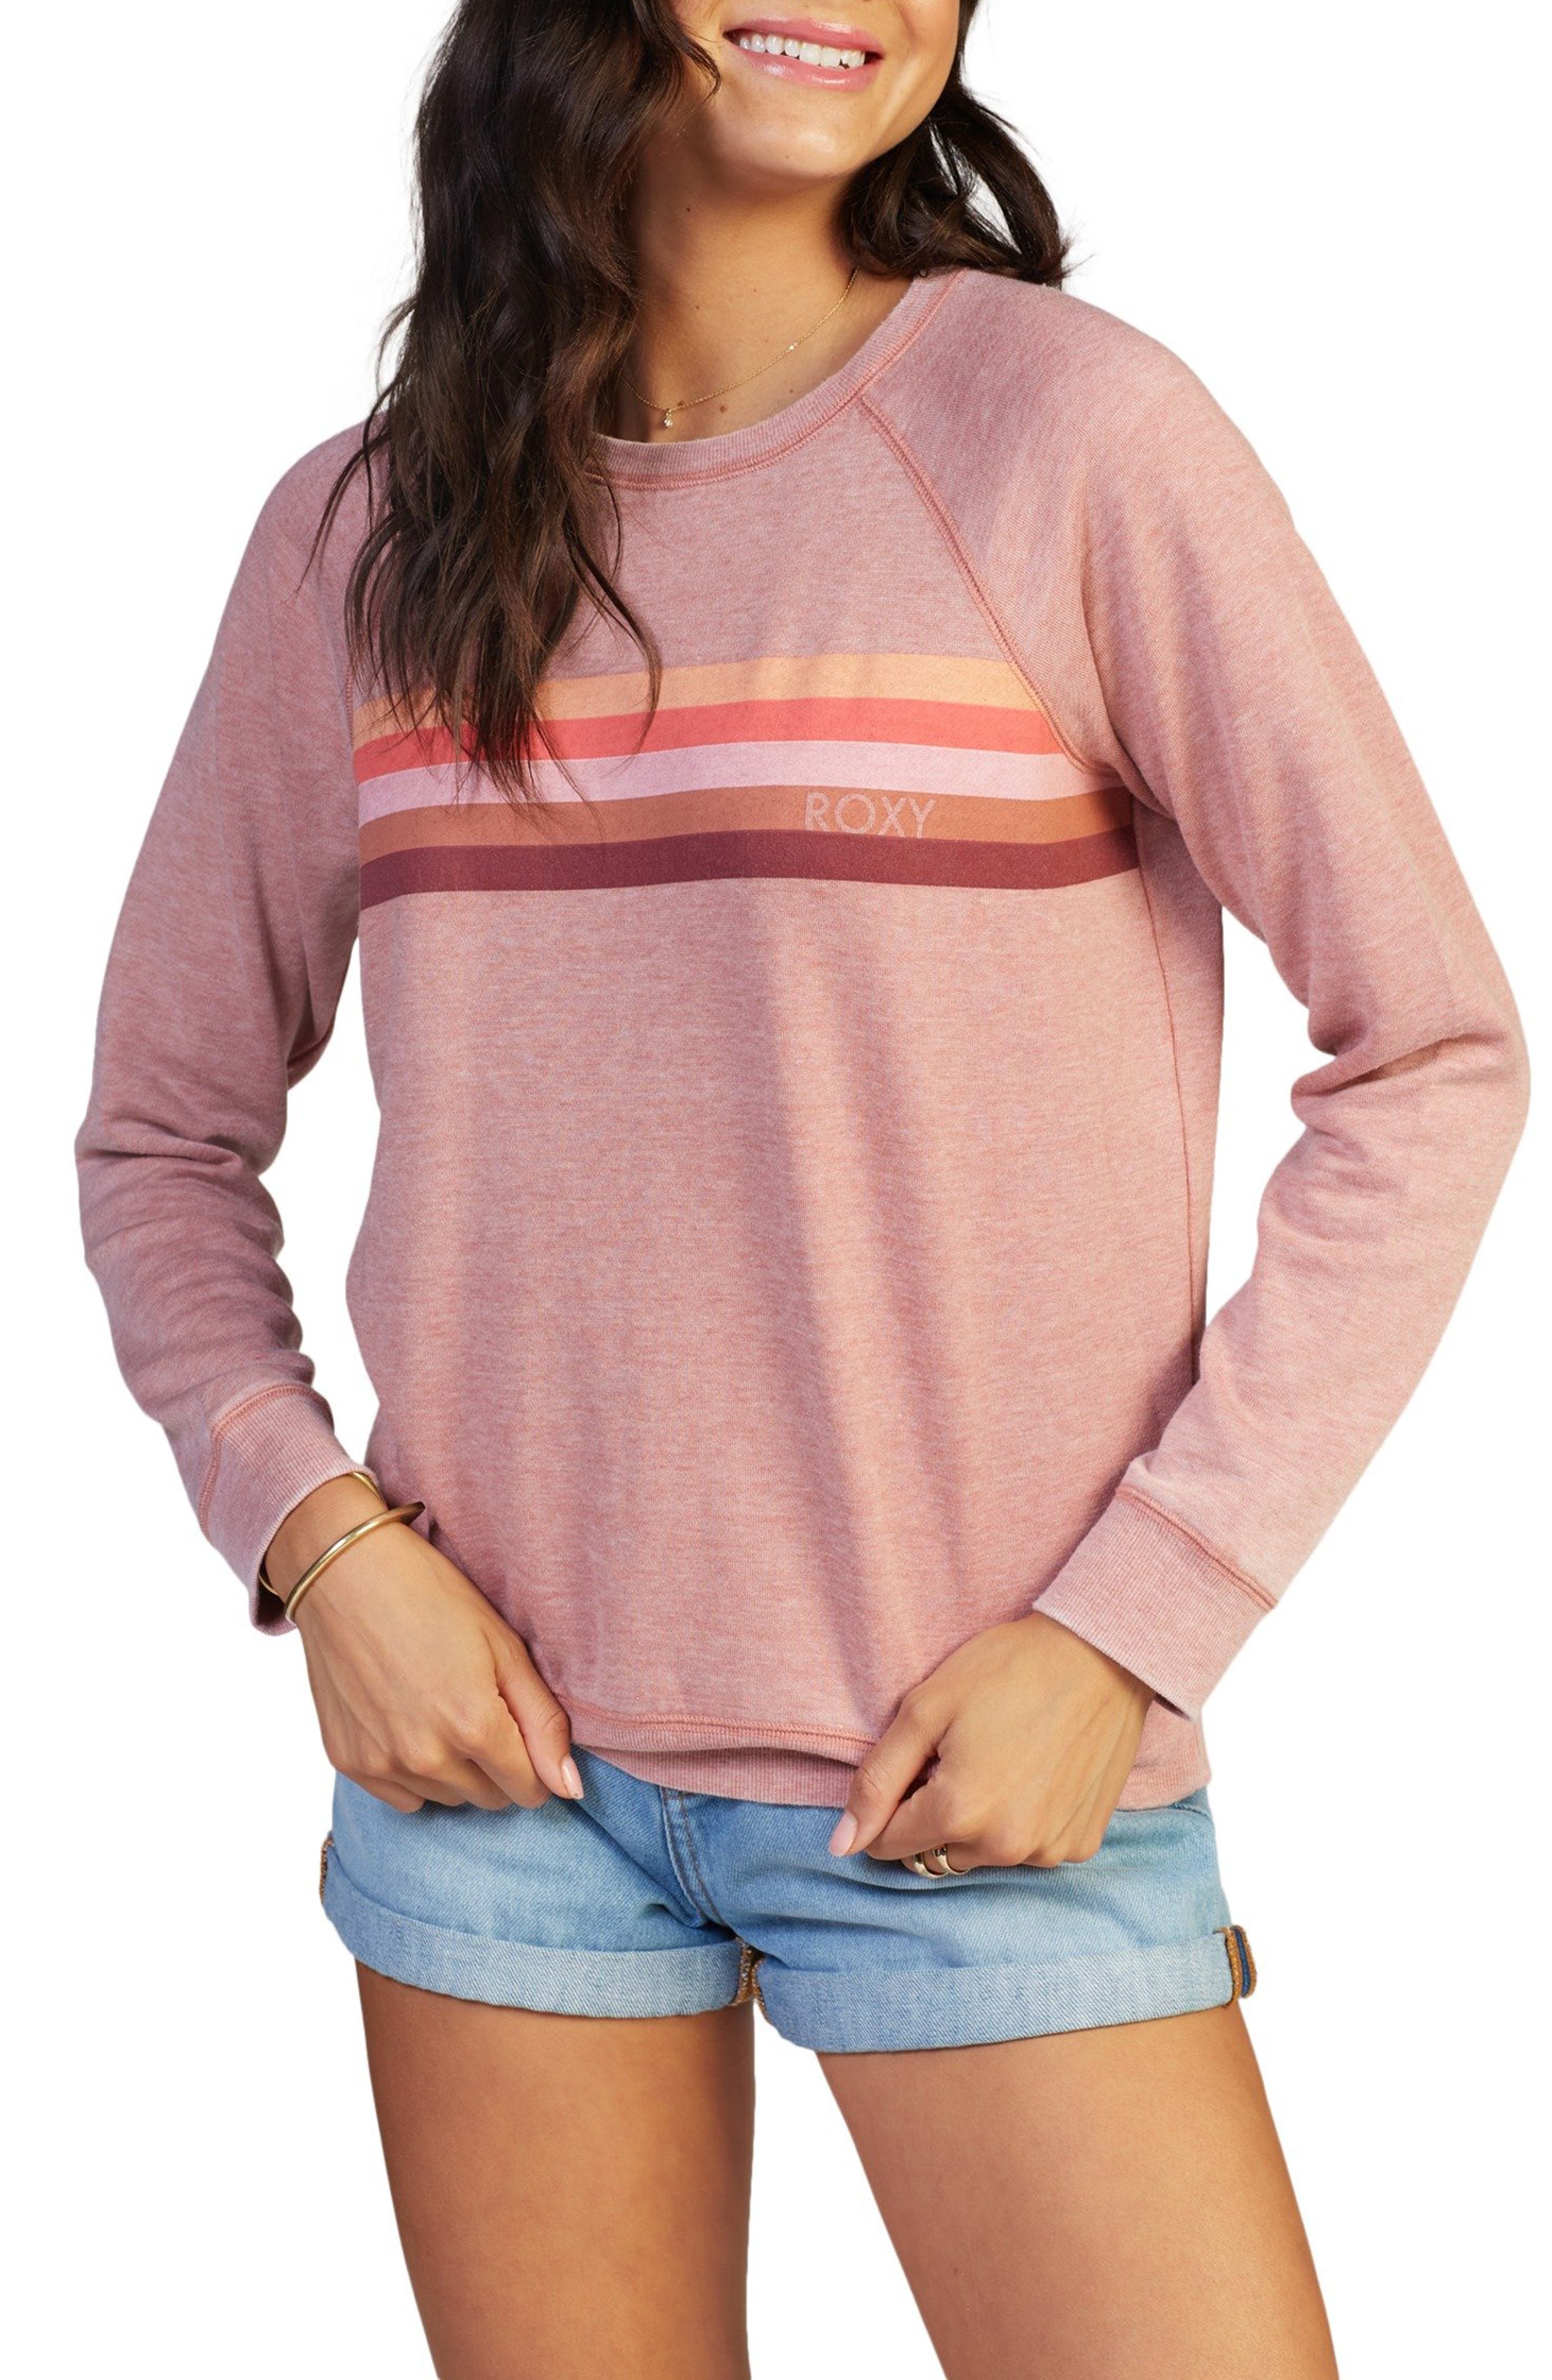 Women's Pink Roxy Clothing | Nordstrom